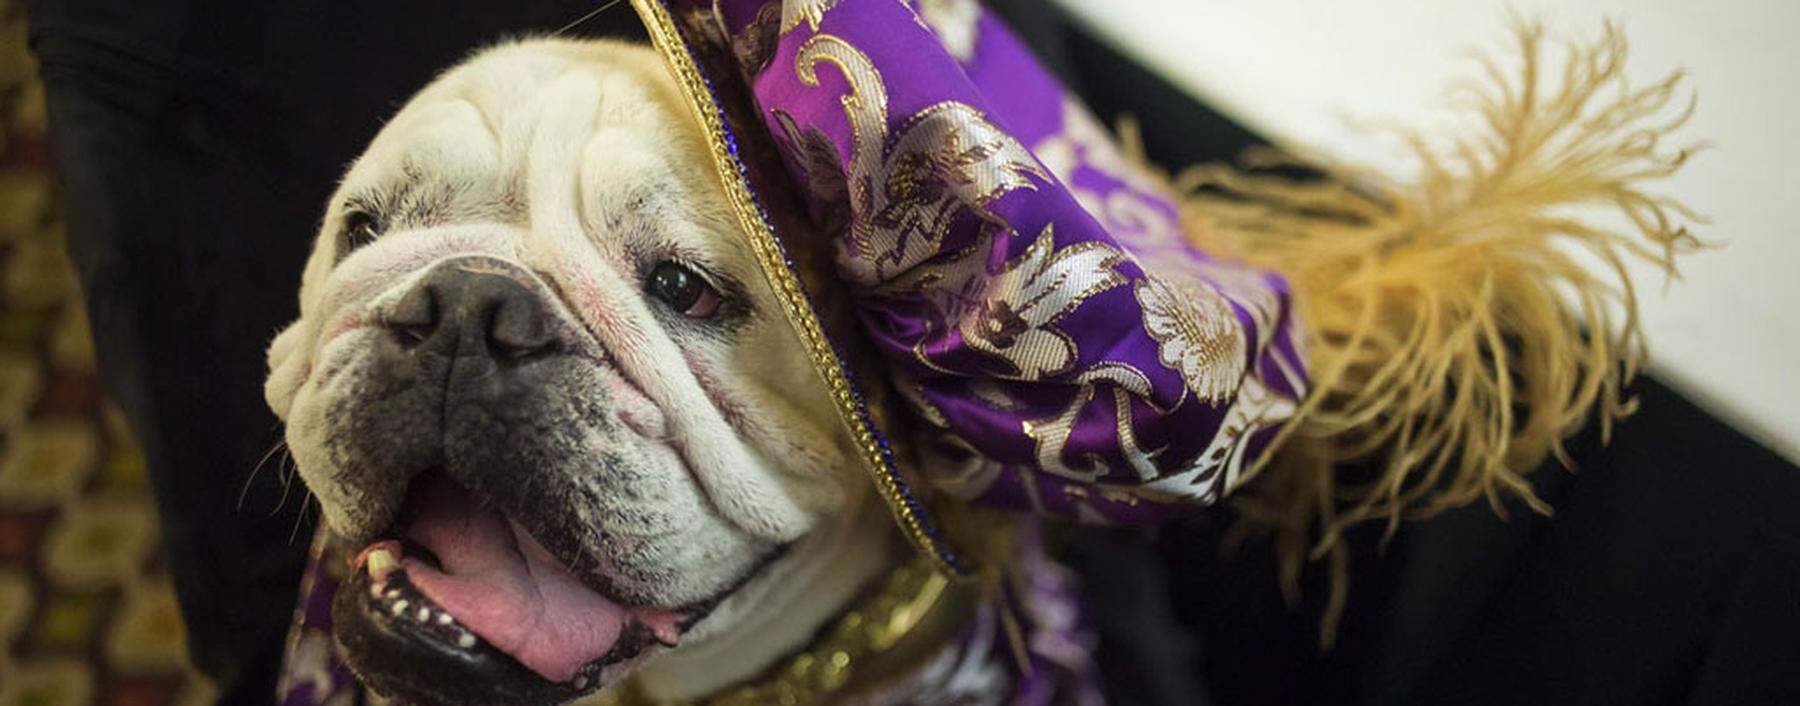 A dog is pictured during the 2014 New York Pet Fashion Show